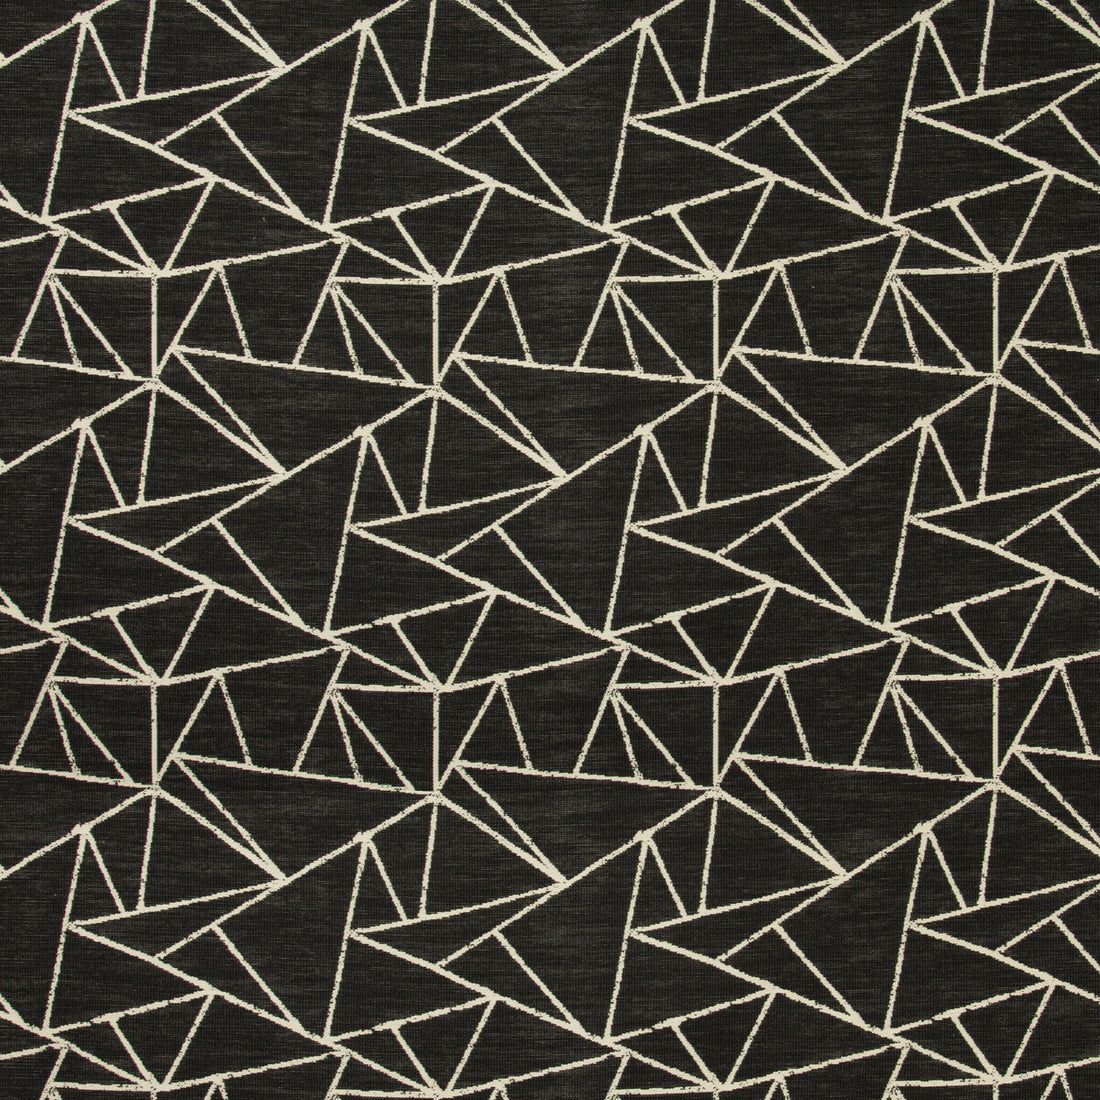 Kravet Design fabric in 35001-8 color - pattern 35001.8.0 - by Kravet Design in the Performance Crypton Home collection